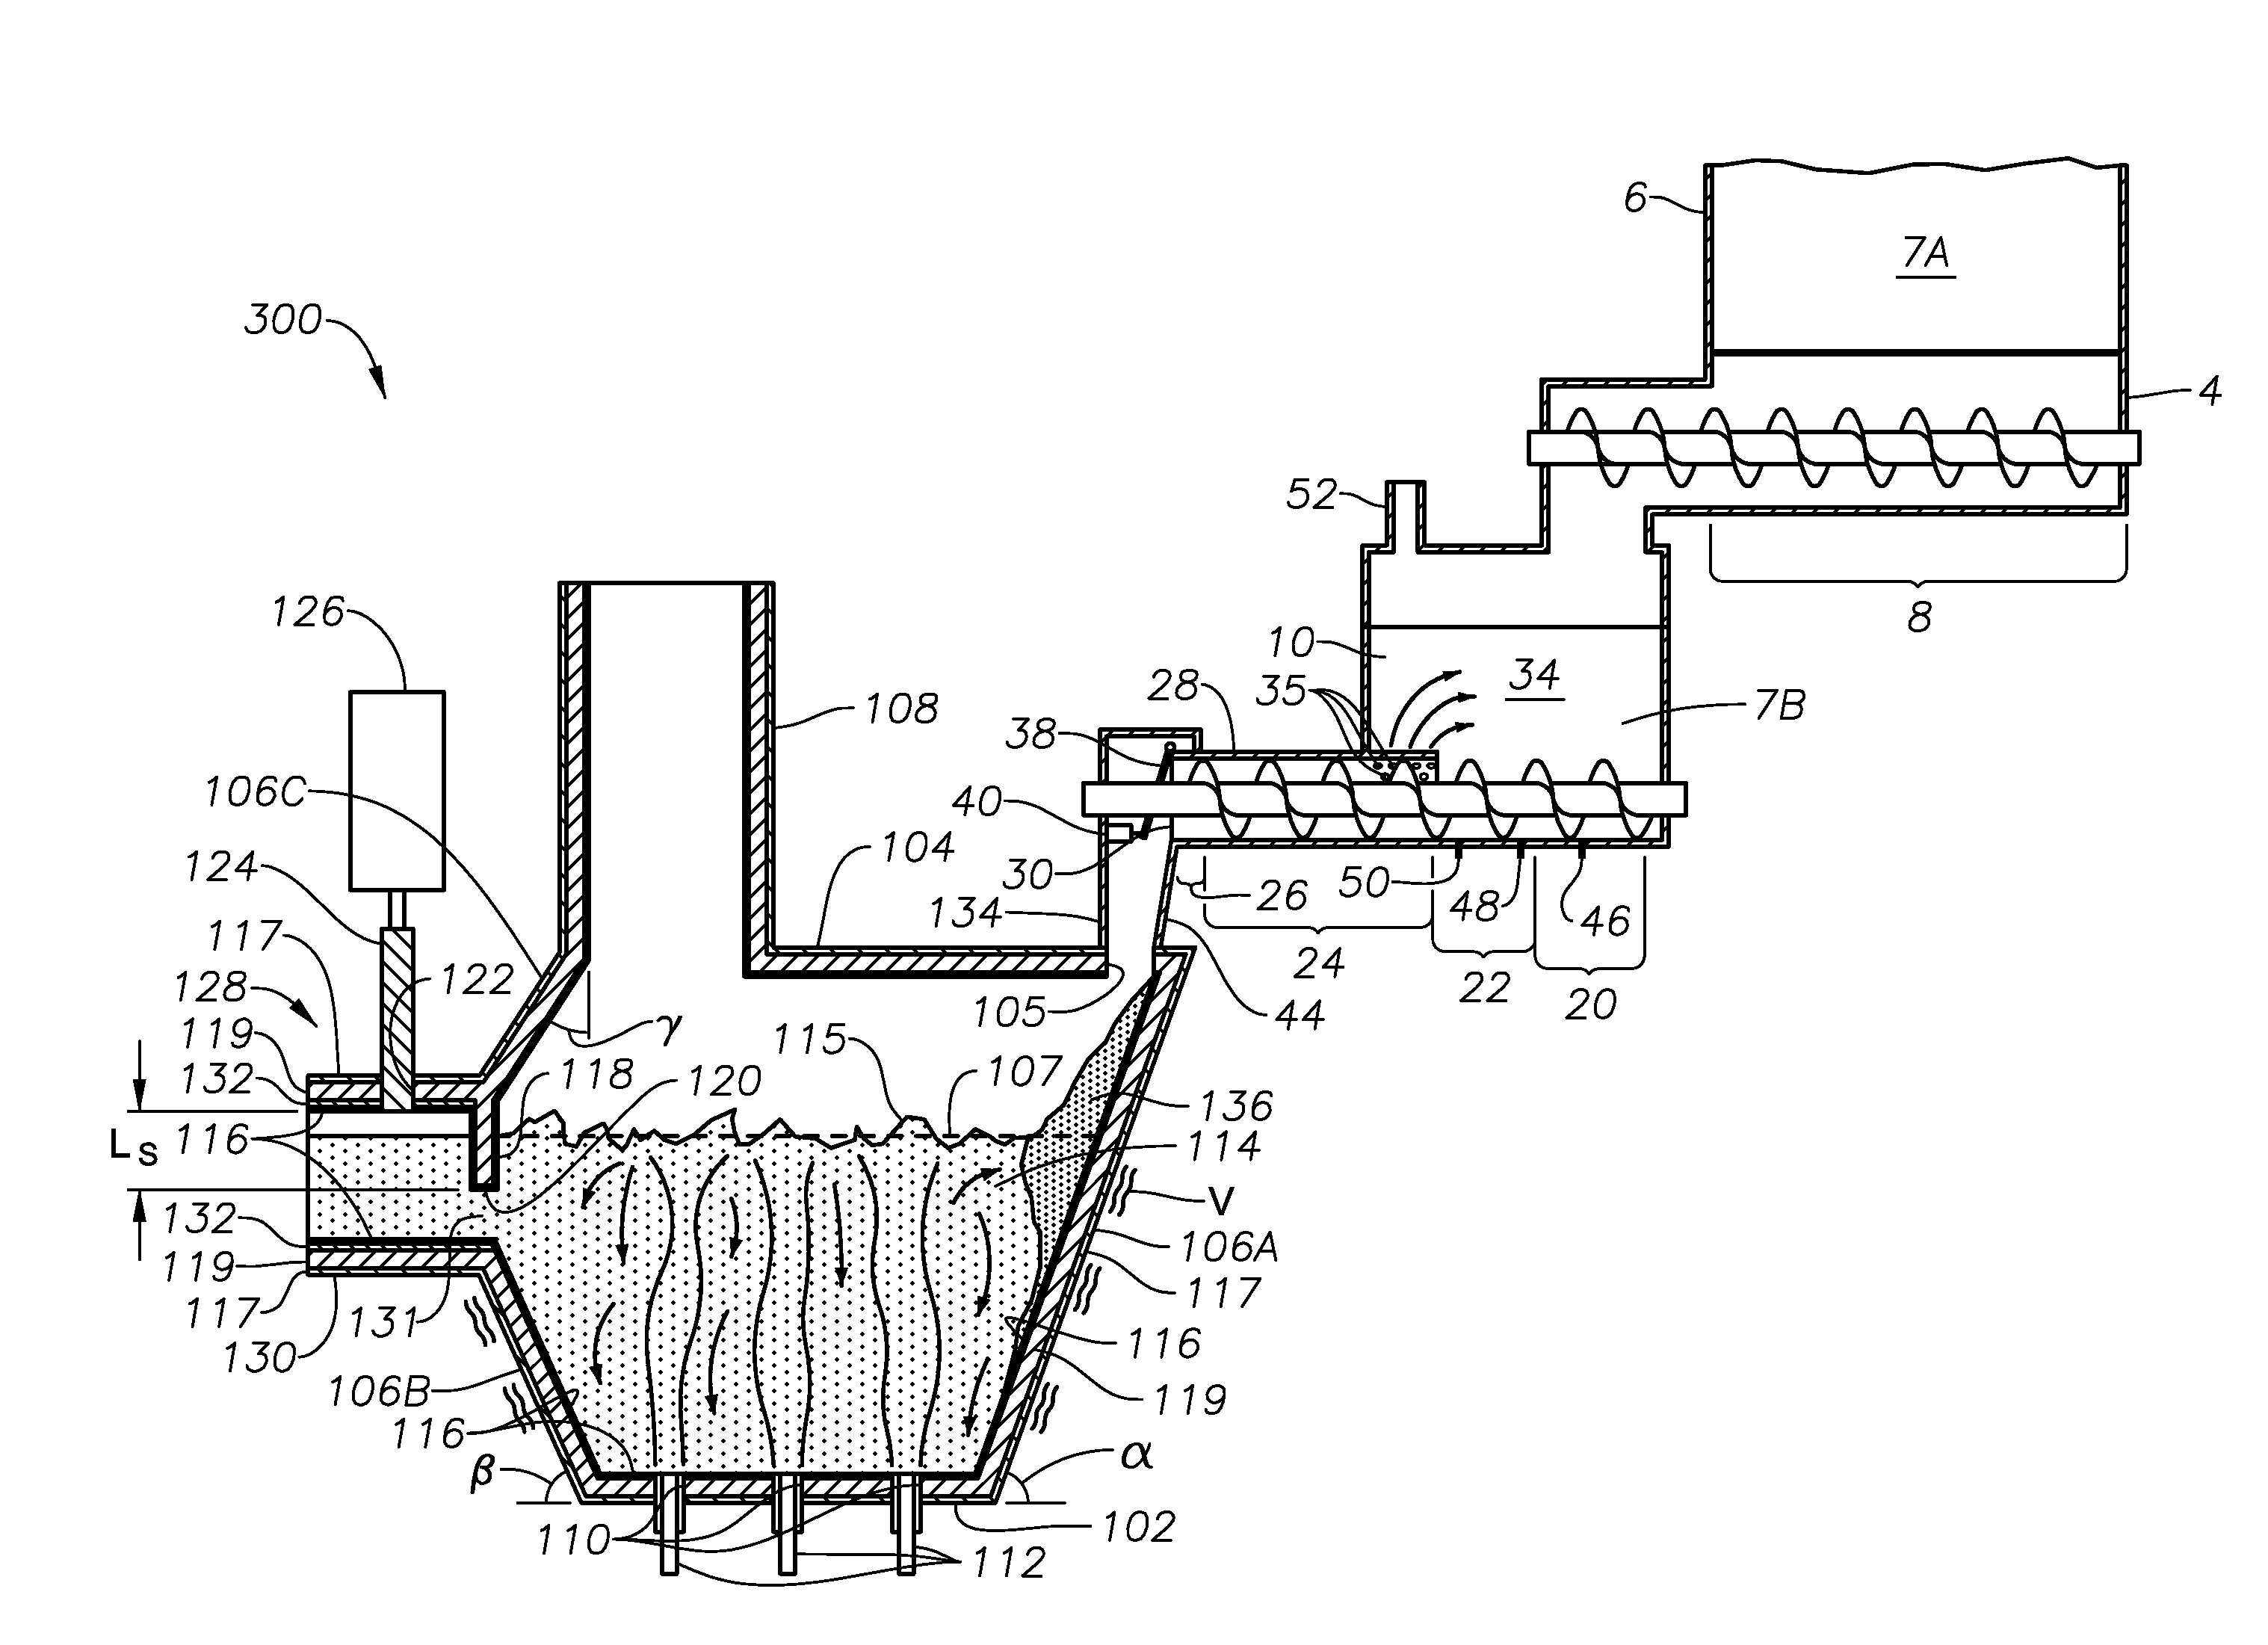 Processes for producing molten glasses from glass batches using turbulent submerged combustion melting, and systems for carrying out such processes